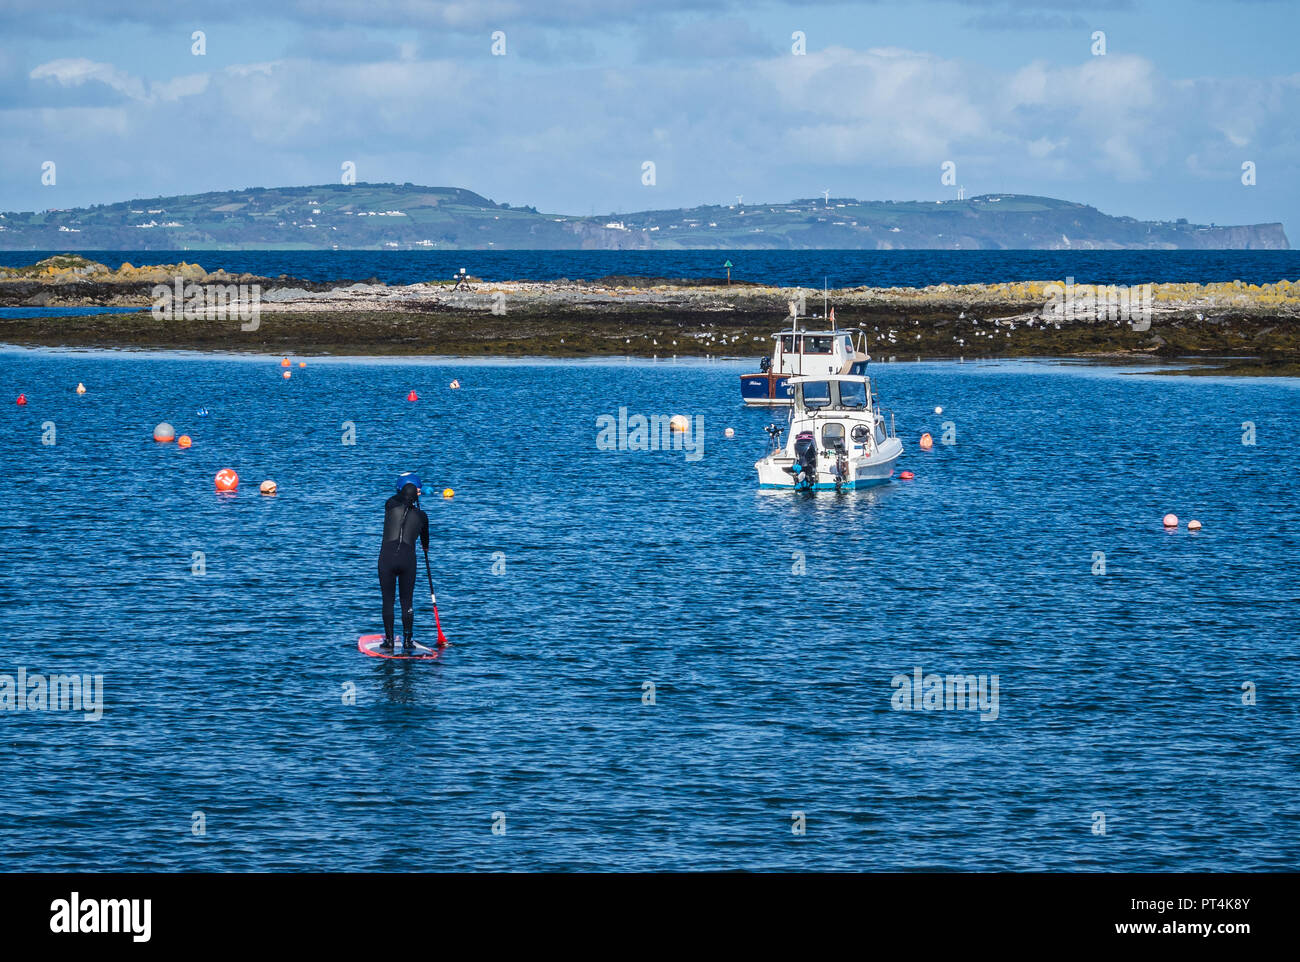 Paddleboarder in Groomsport harbour in Northern Ireland Stock Photo